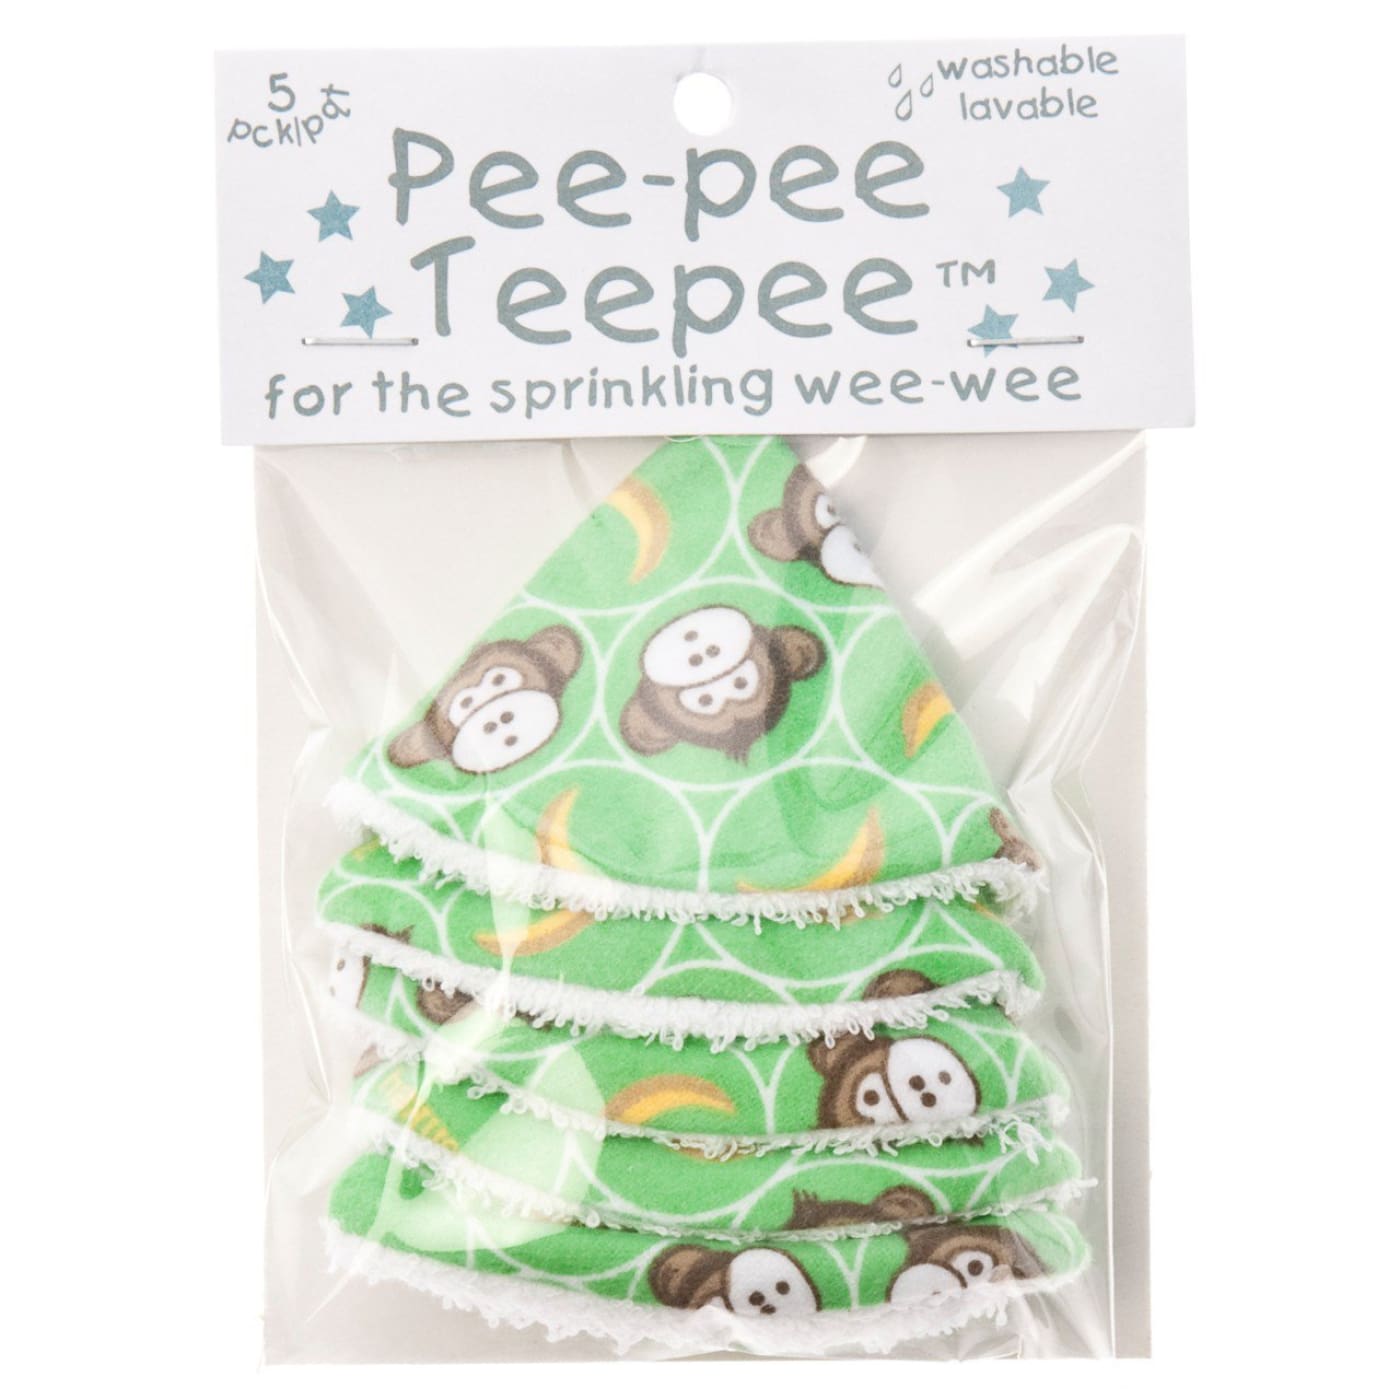 PEE-PEE TEEPEE LIL MONKEY - Lil Monkey - BATHTIME & CHANGING - NAPPIES/WIPES/ACCESSORIES